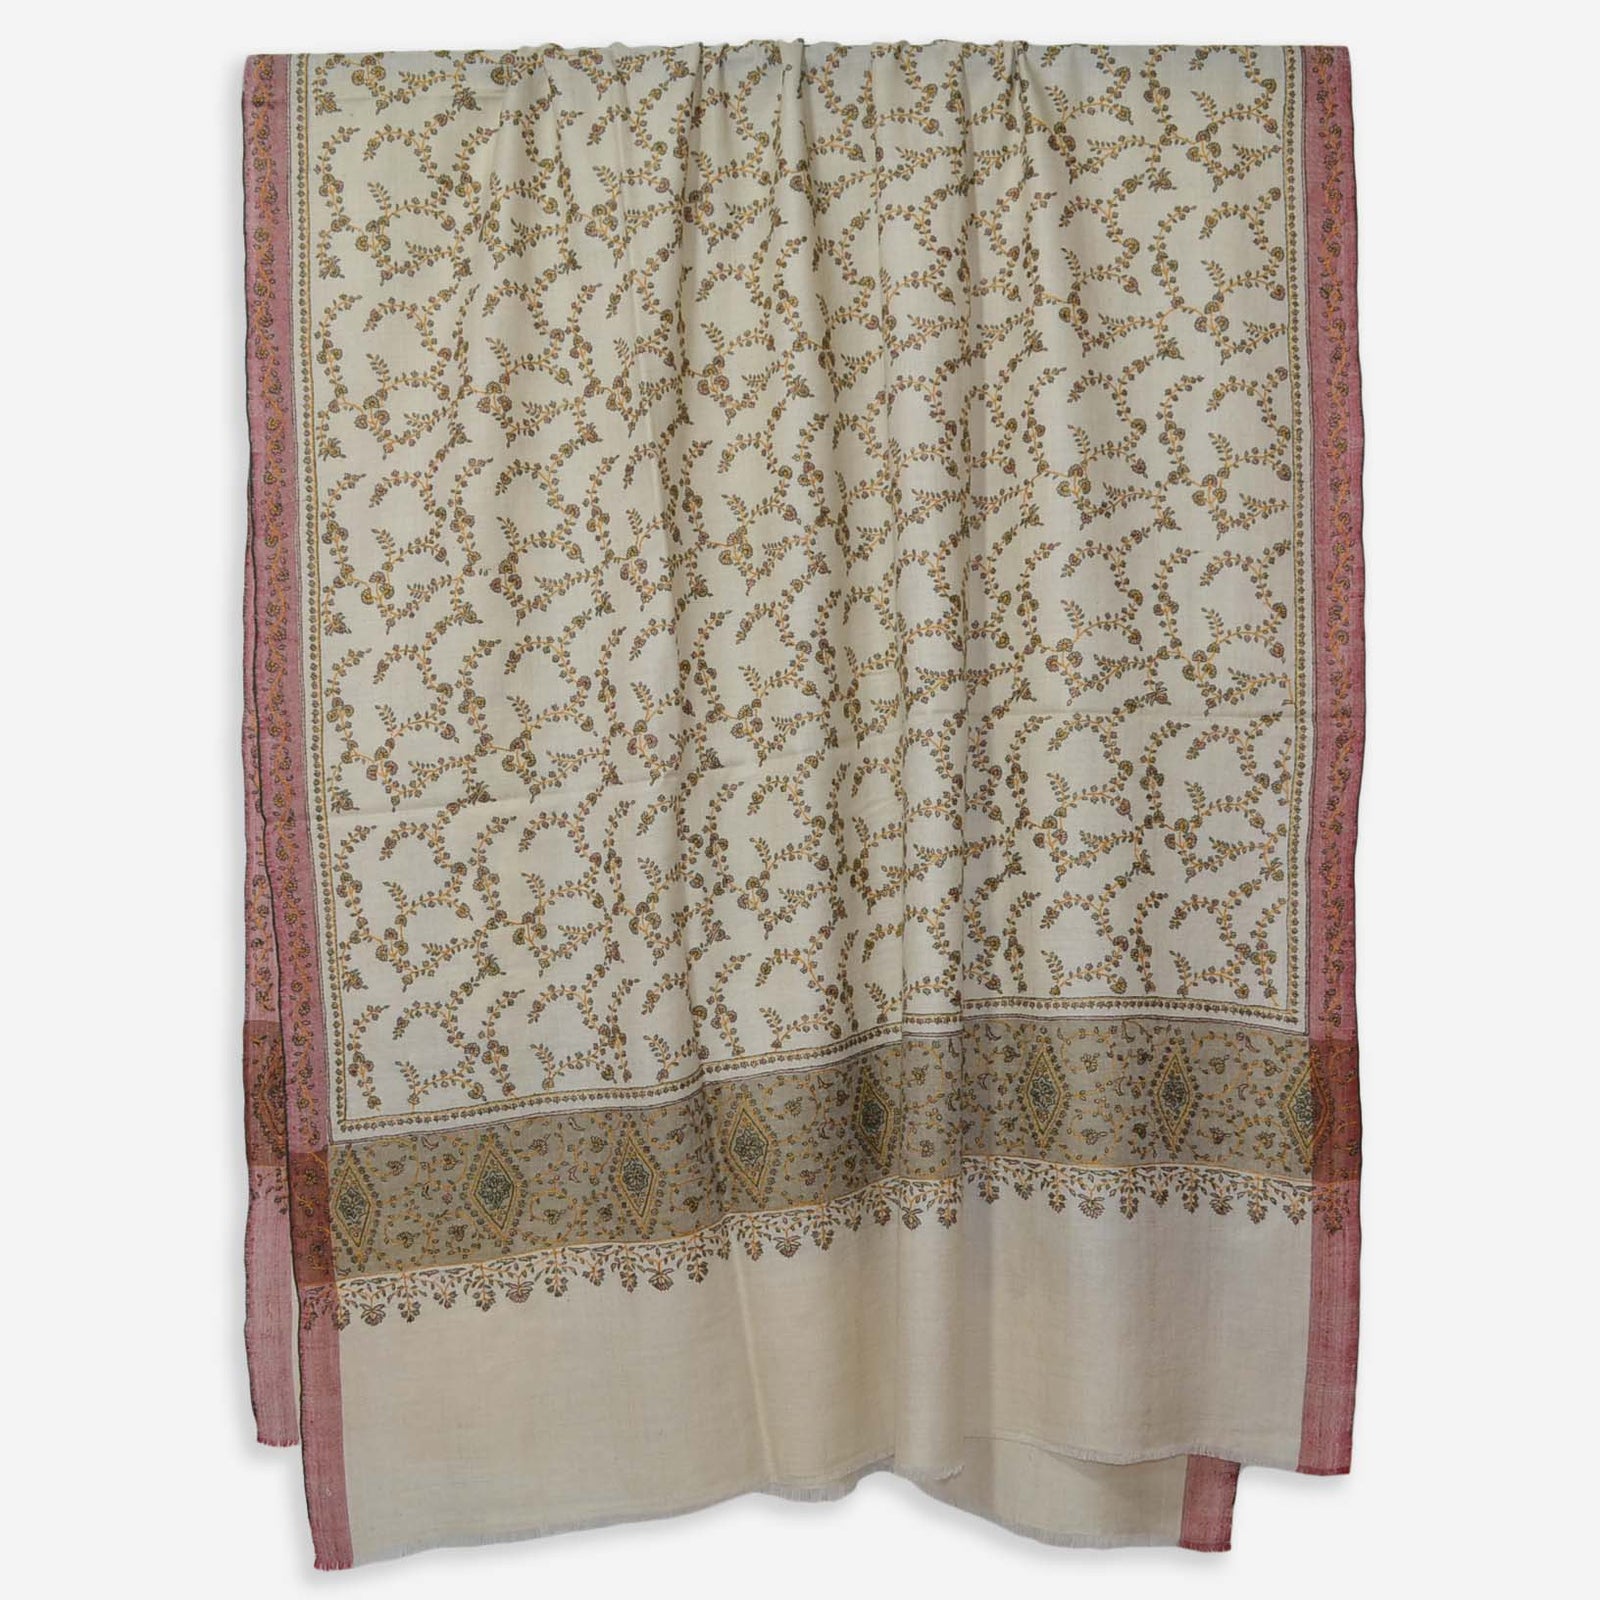 Ivory Cashmere Pashmina Jali Embroidery Shawl with Colored Border